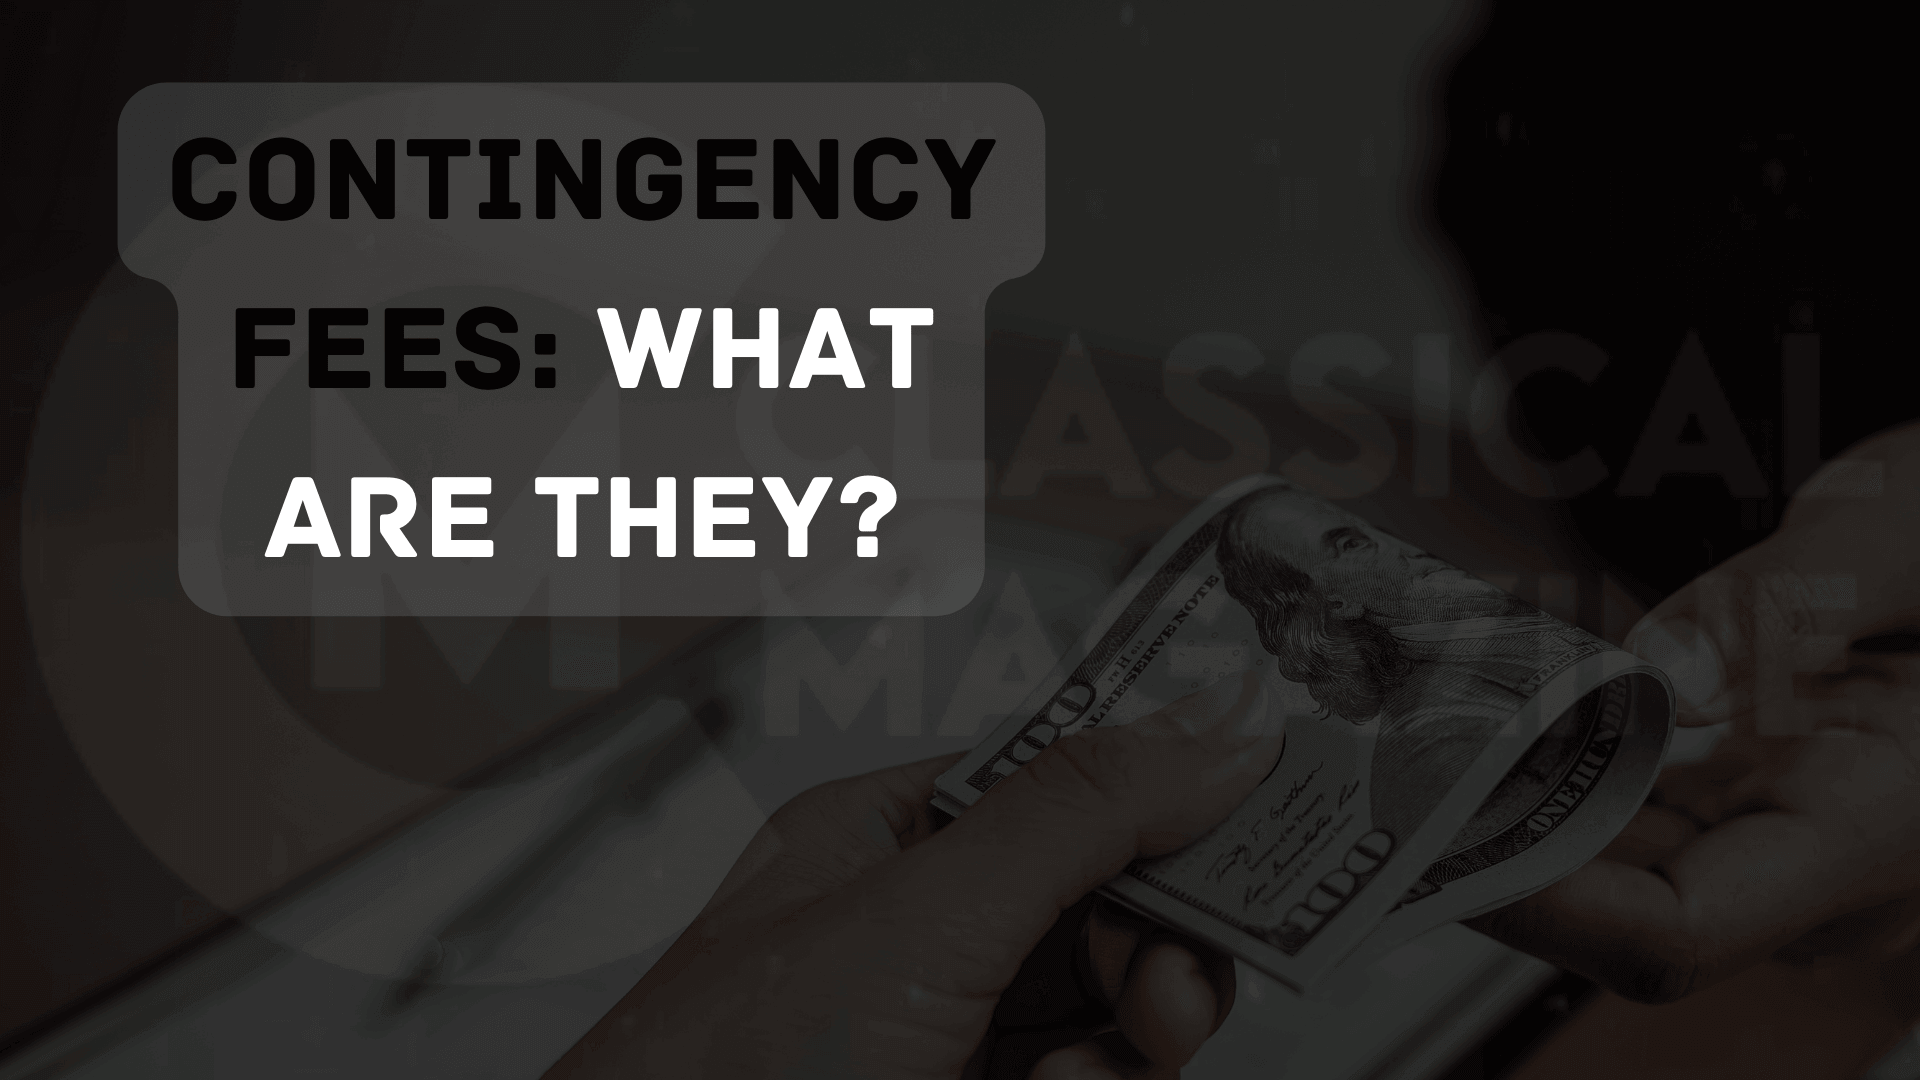 Contingency fees: what are they?